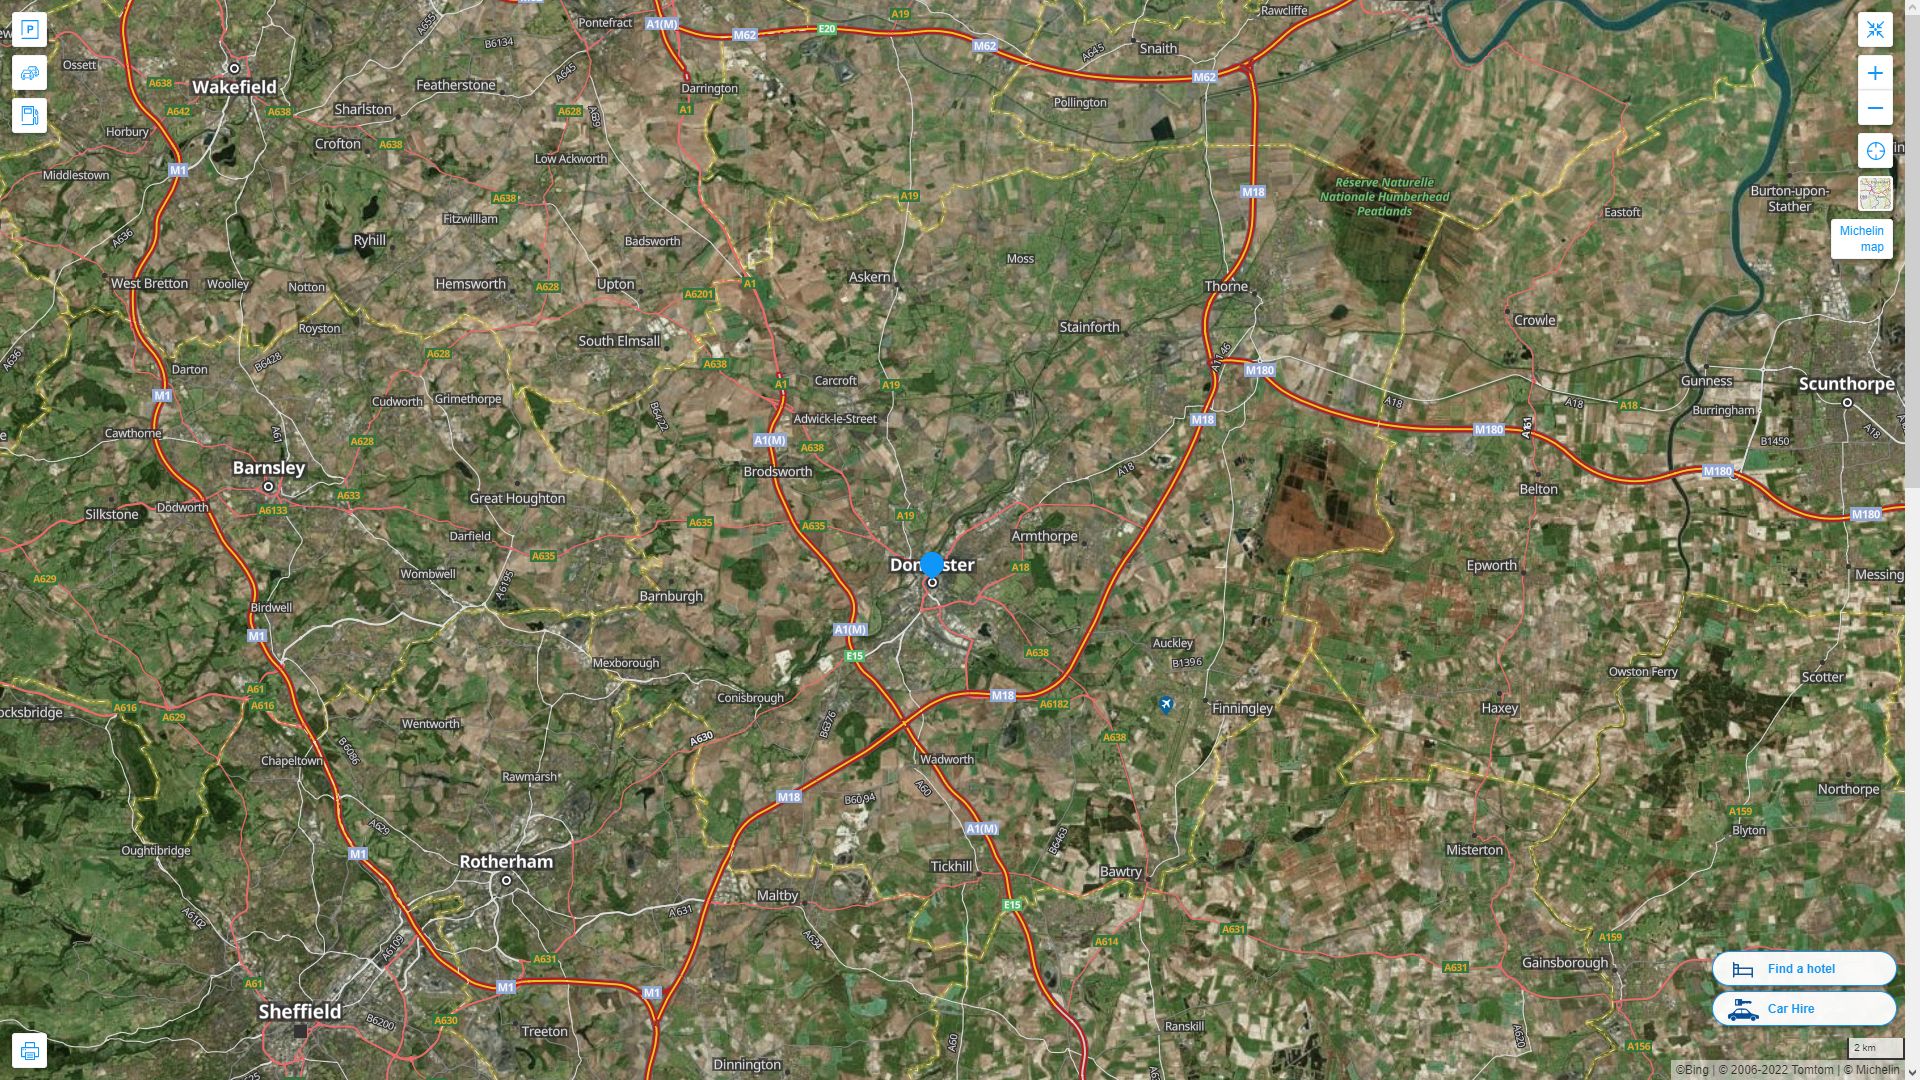 Doncaster Highway and Road Map with Satellite View